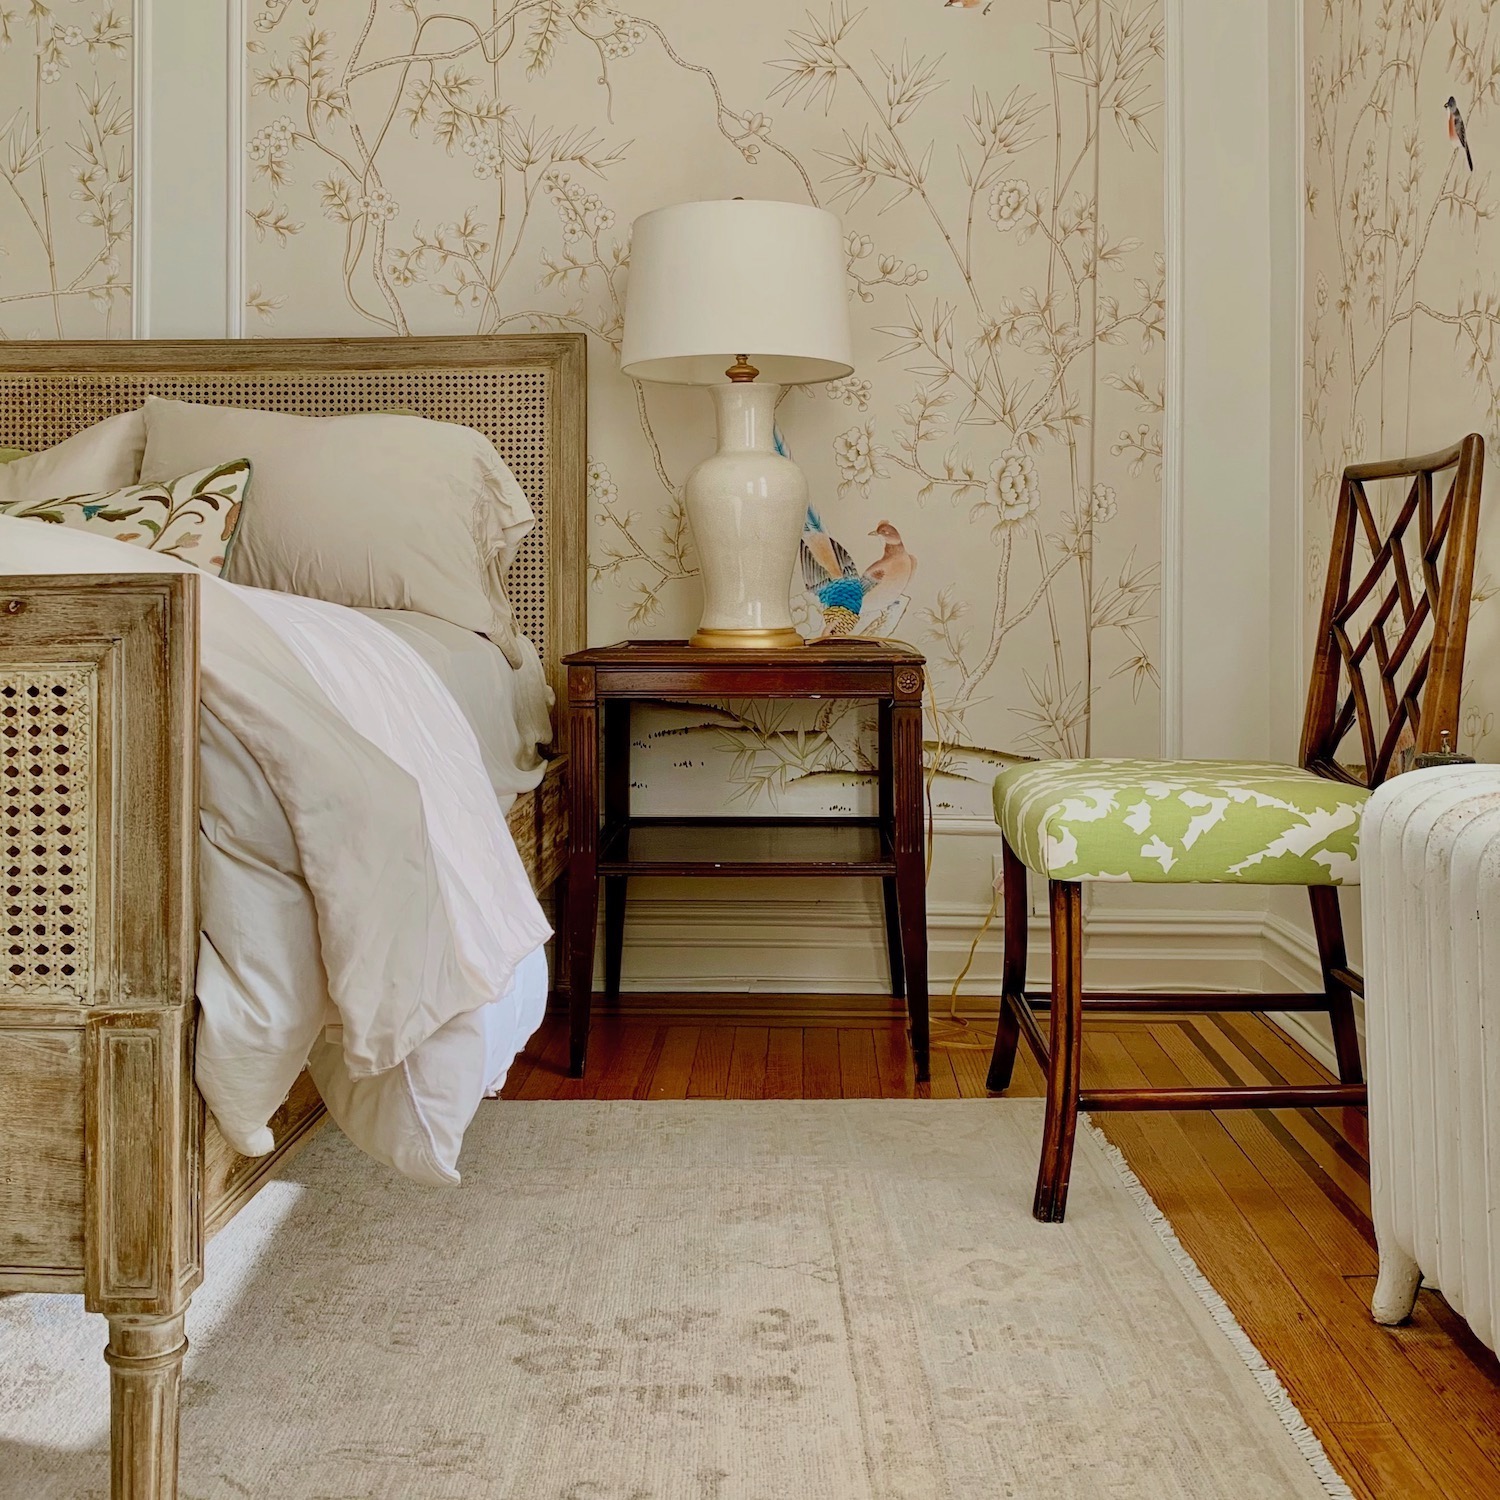 Pondfield Rd W - Bronxville apartment for sale - bedroom - Mural Sources - Chinoiserie Wallpaper - Benjamin Moore White Dove wall color - Harbour Cane bed - Serena & Lily